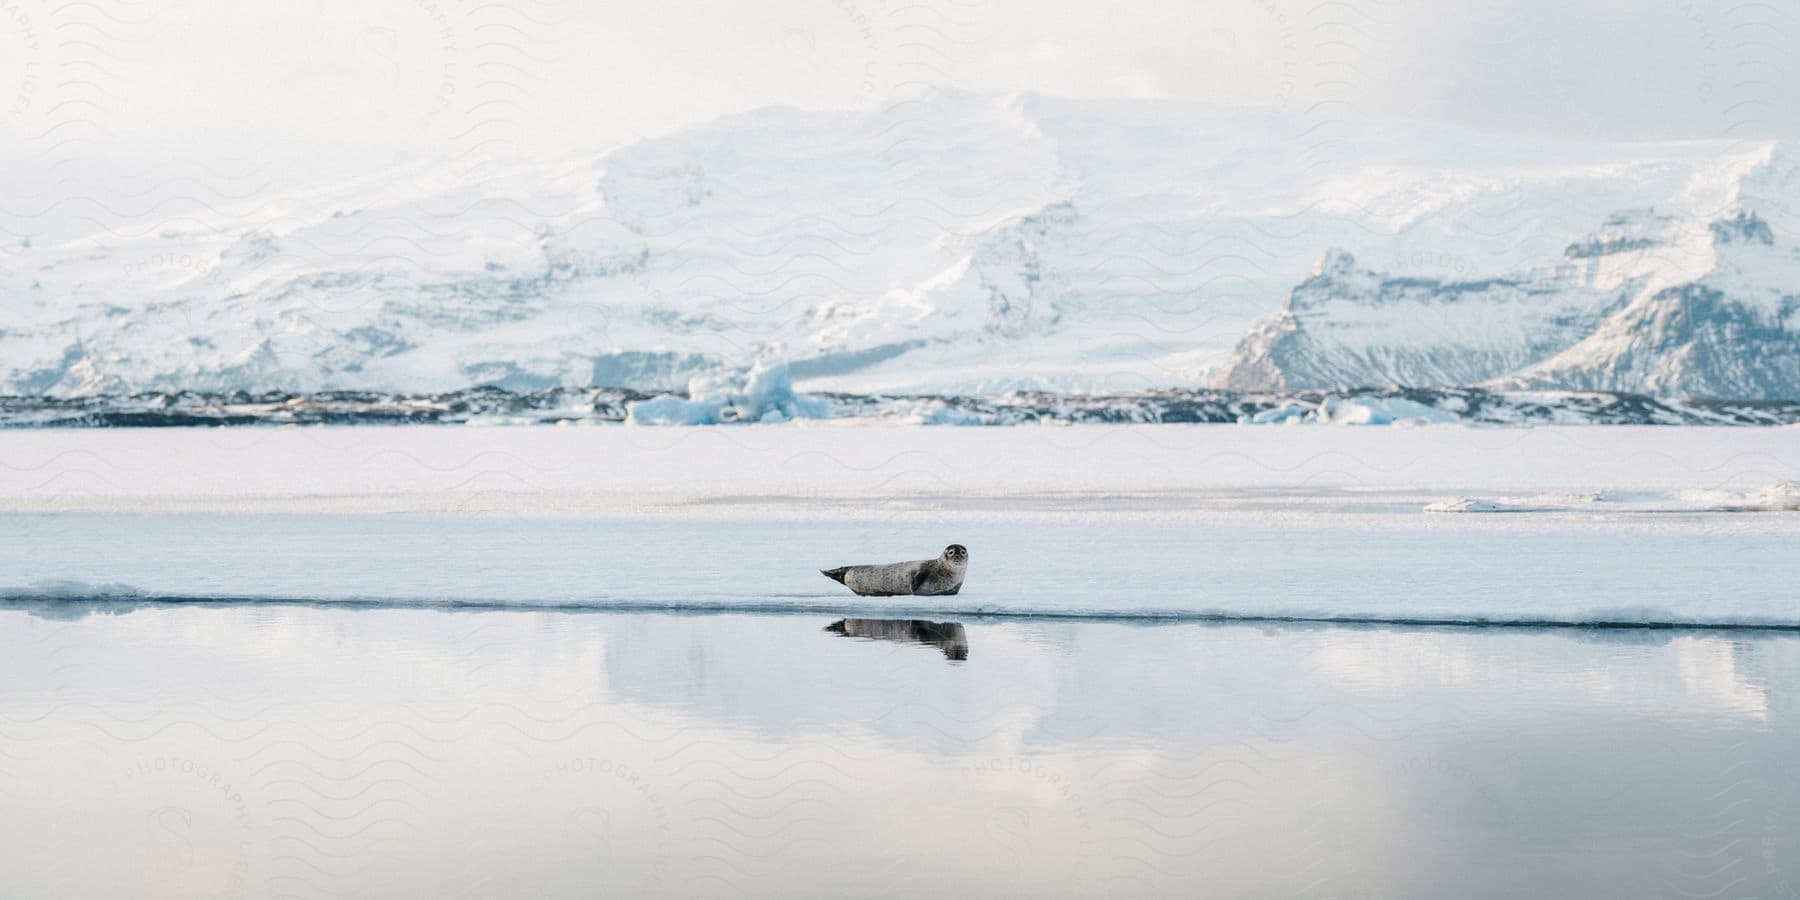 An arctic seal lays on the edge of the ice near the water with glacial landforms in the distance